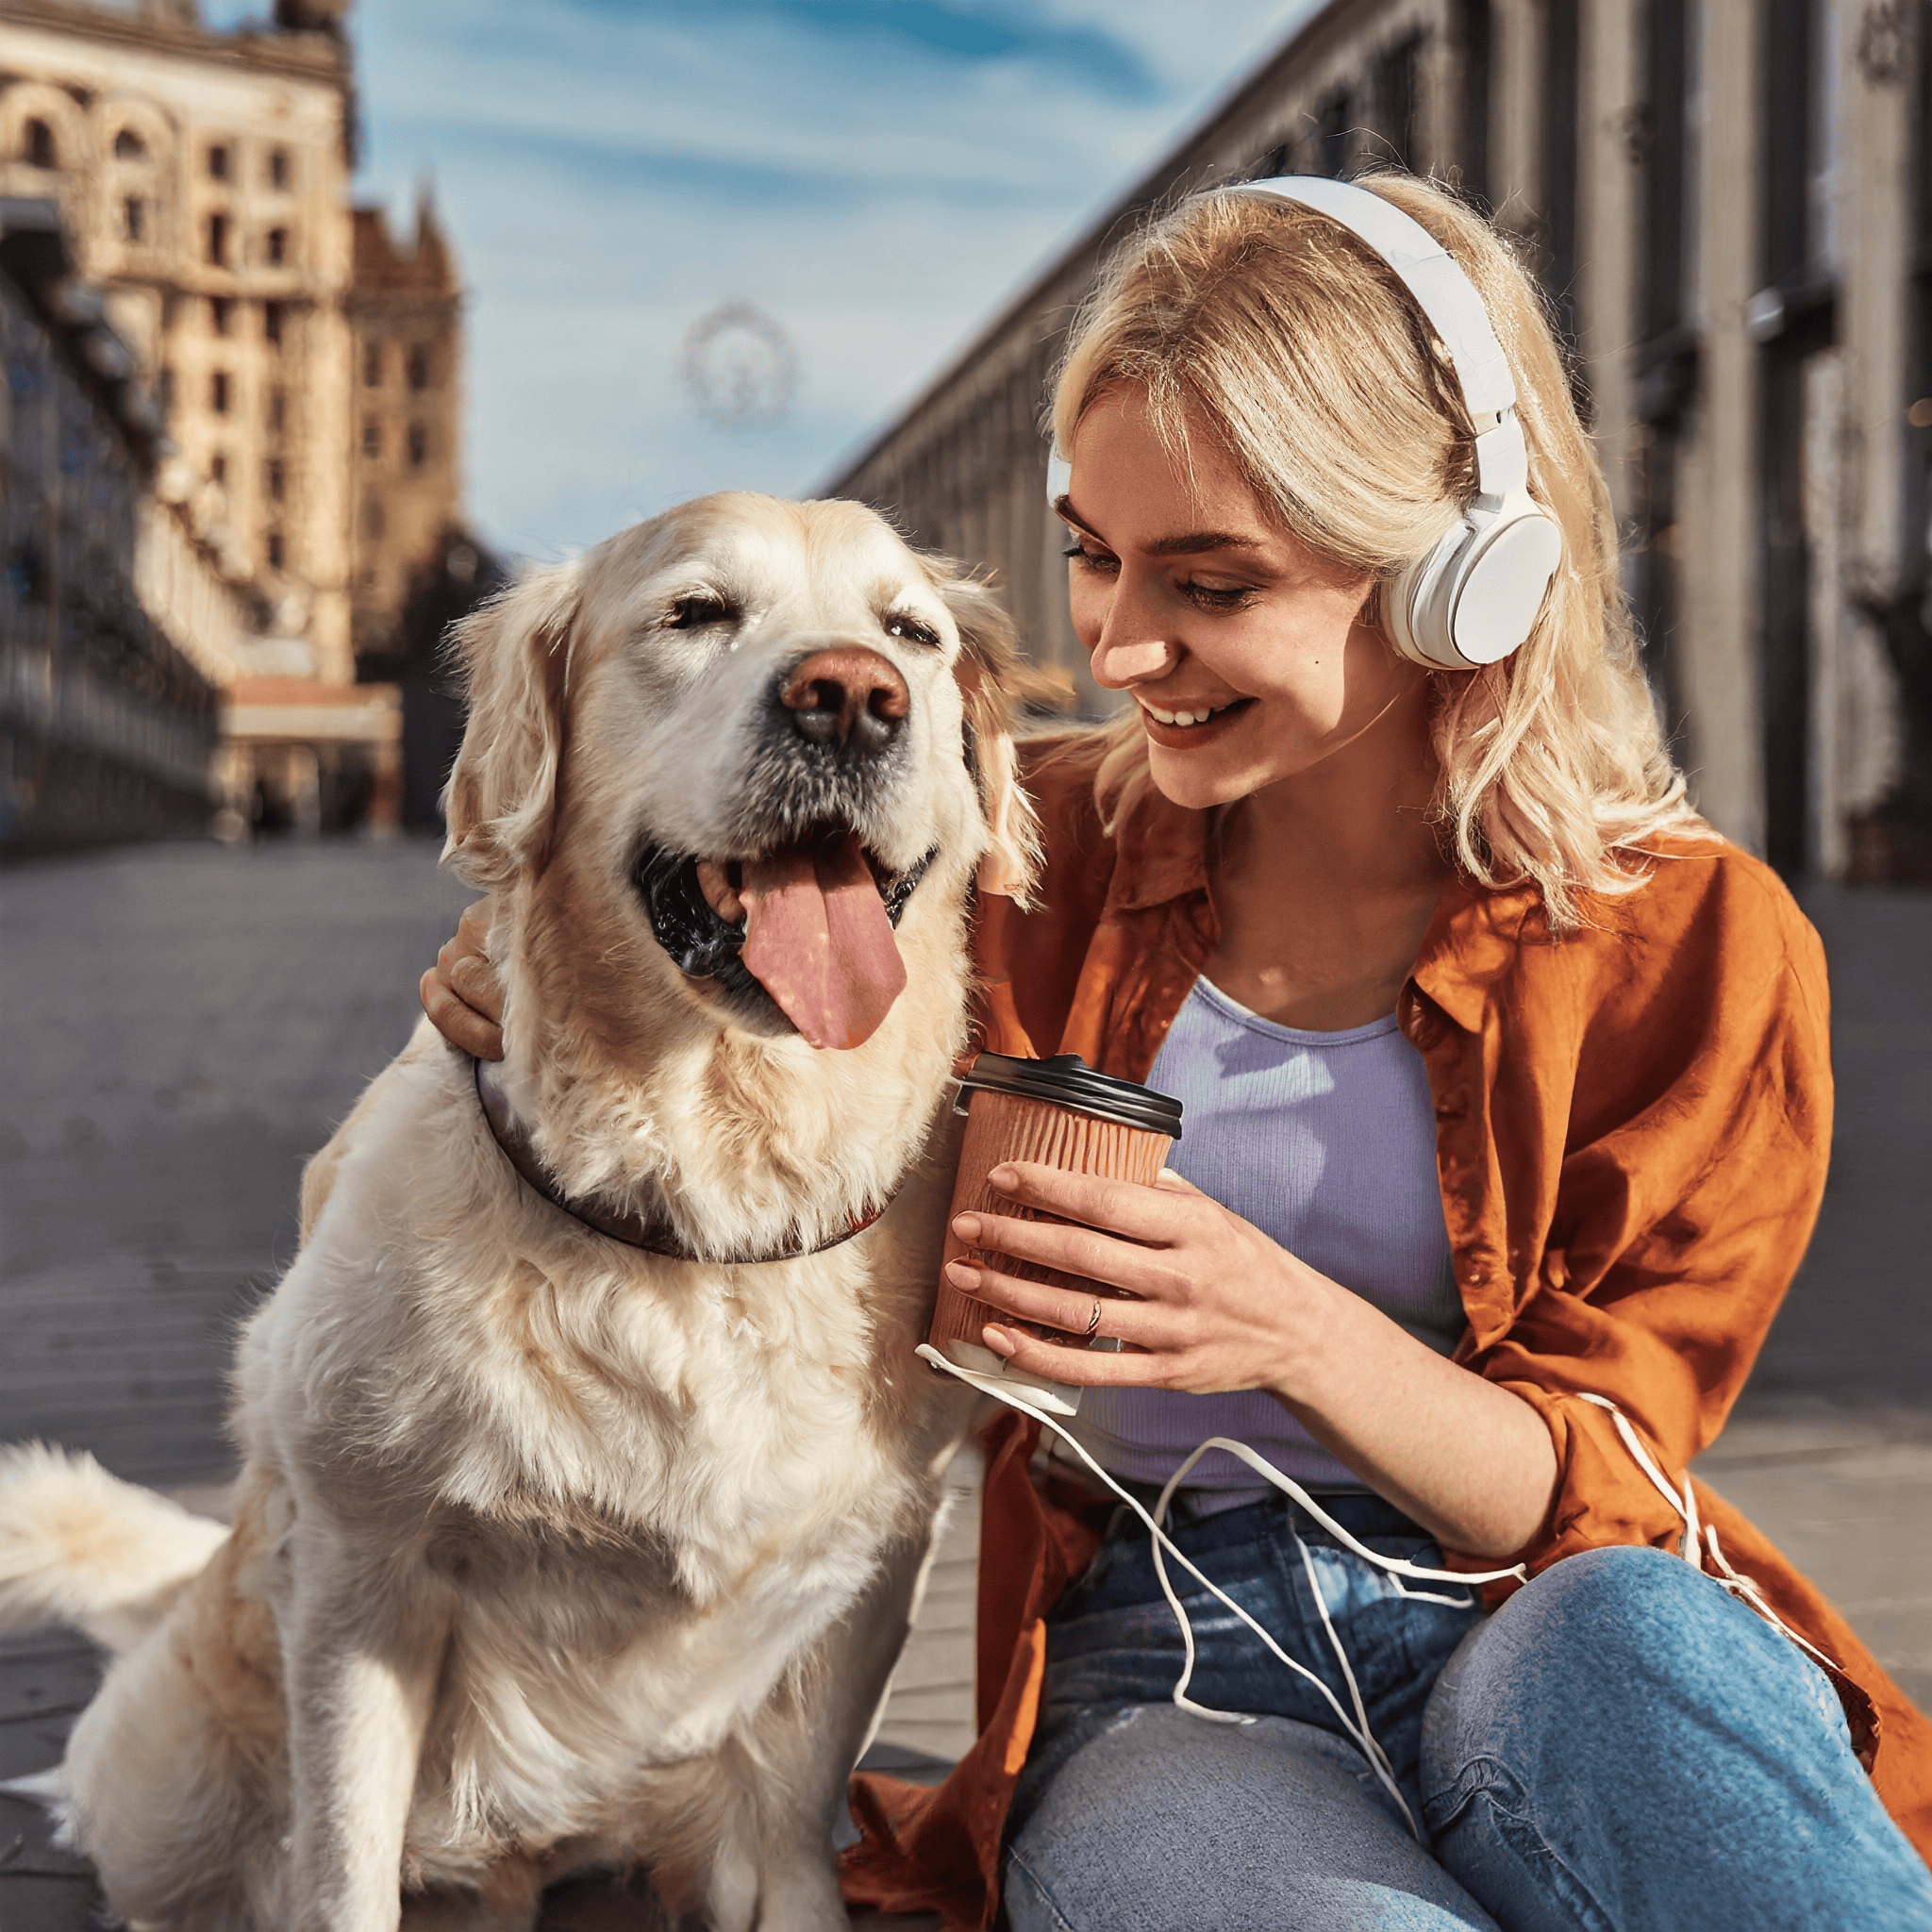 Music is a treat for dogs and humans.